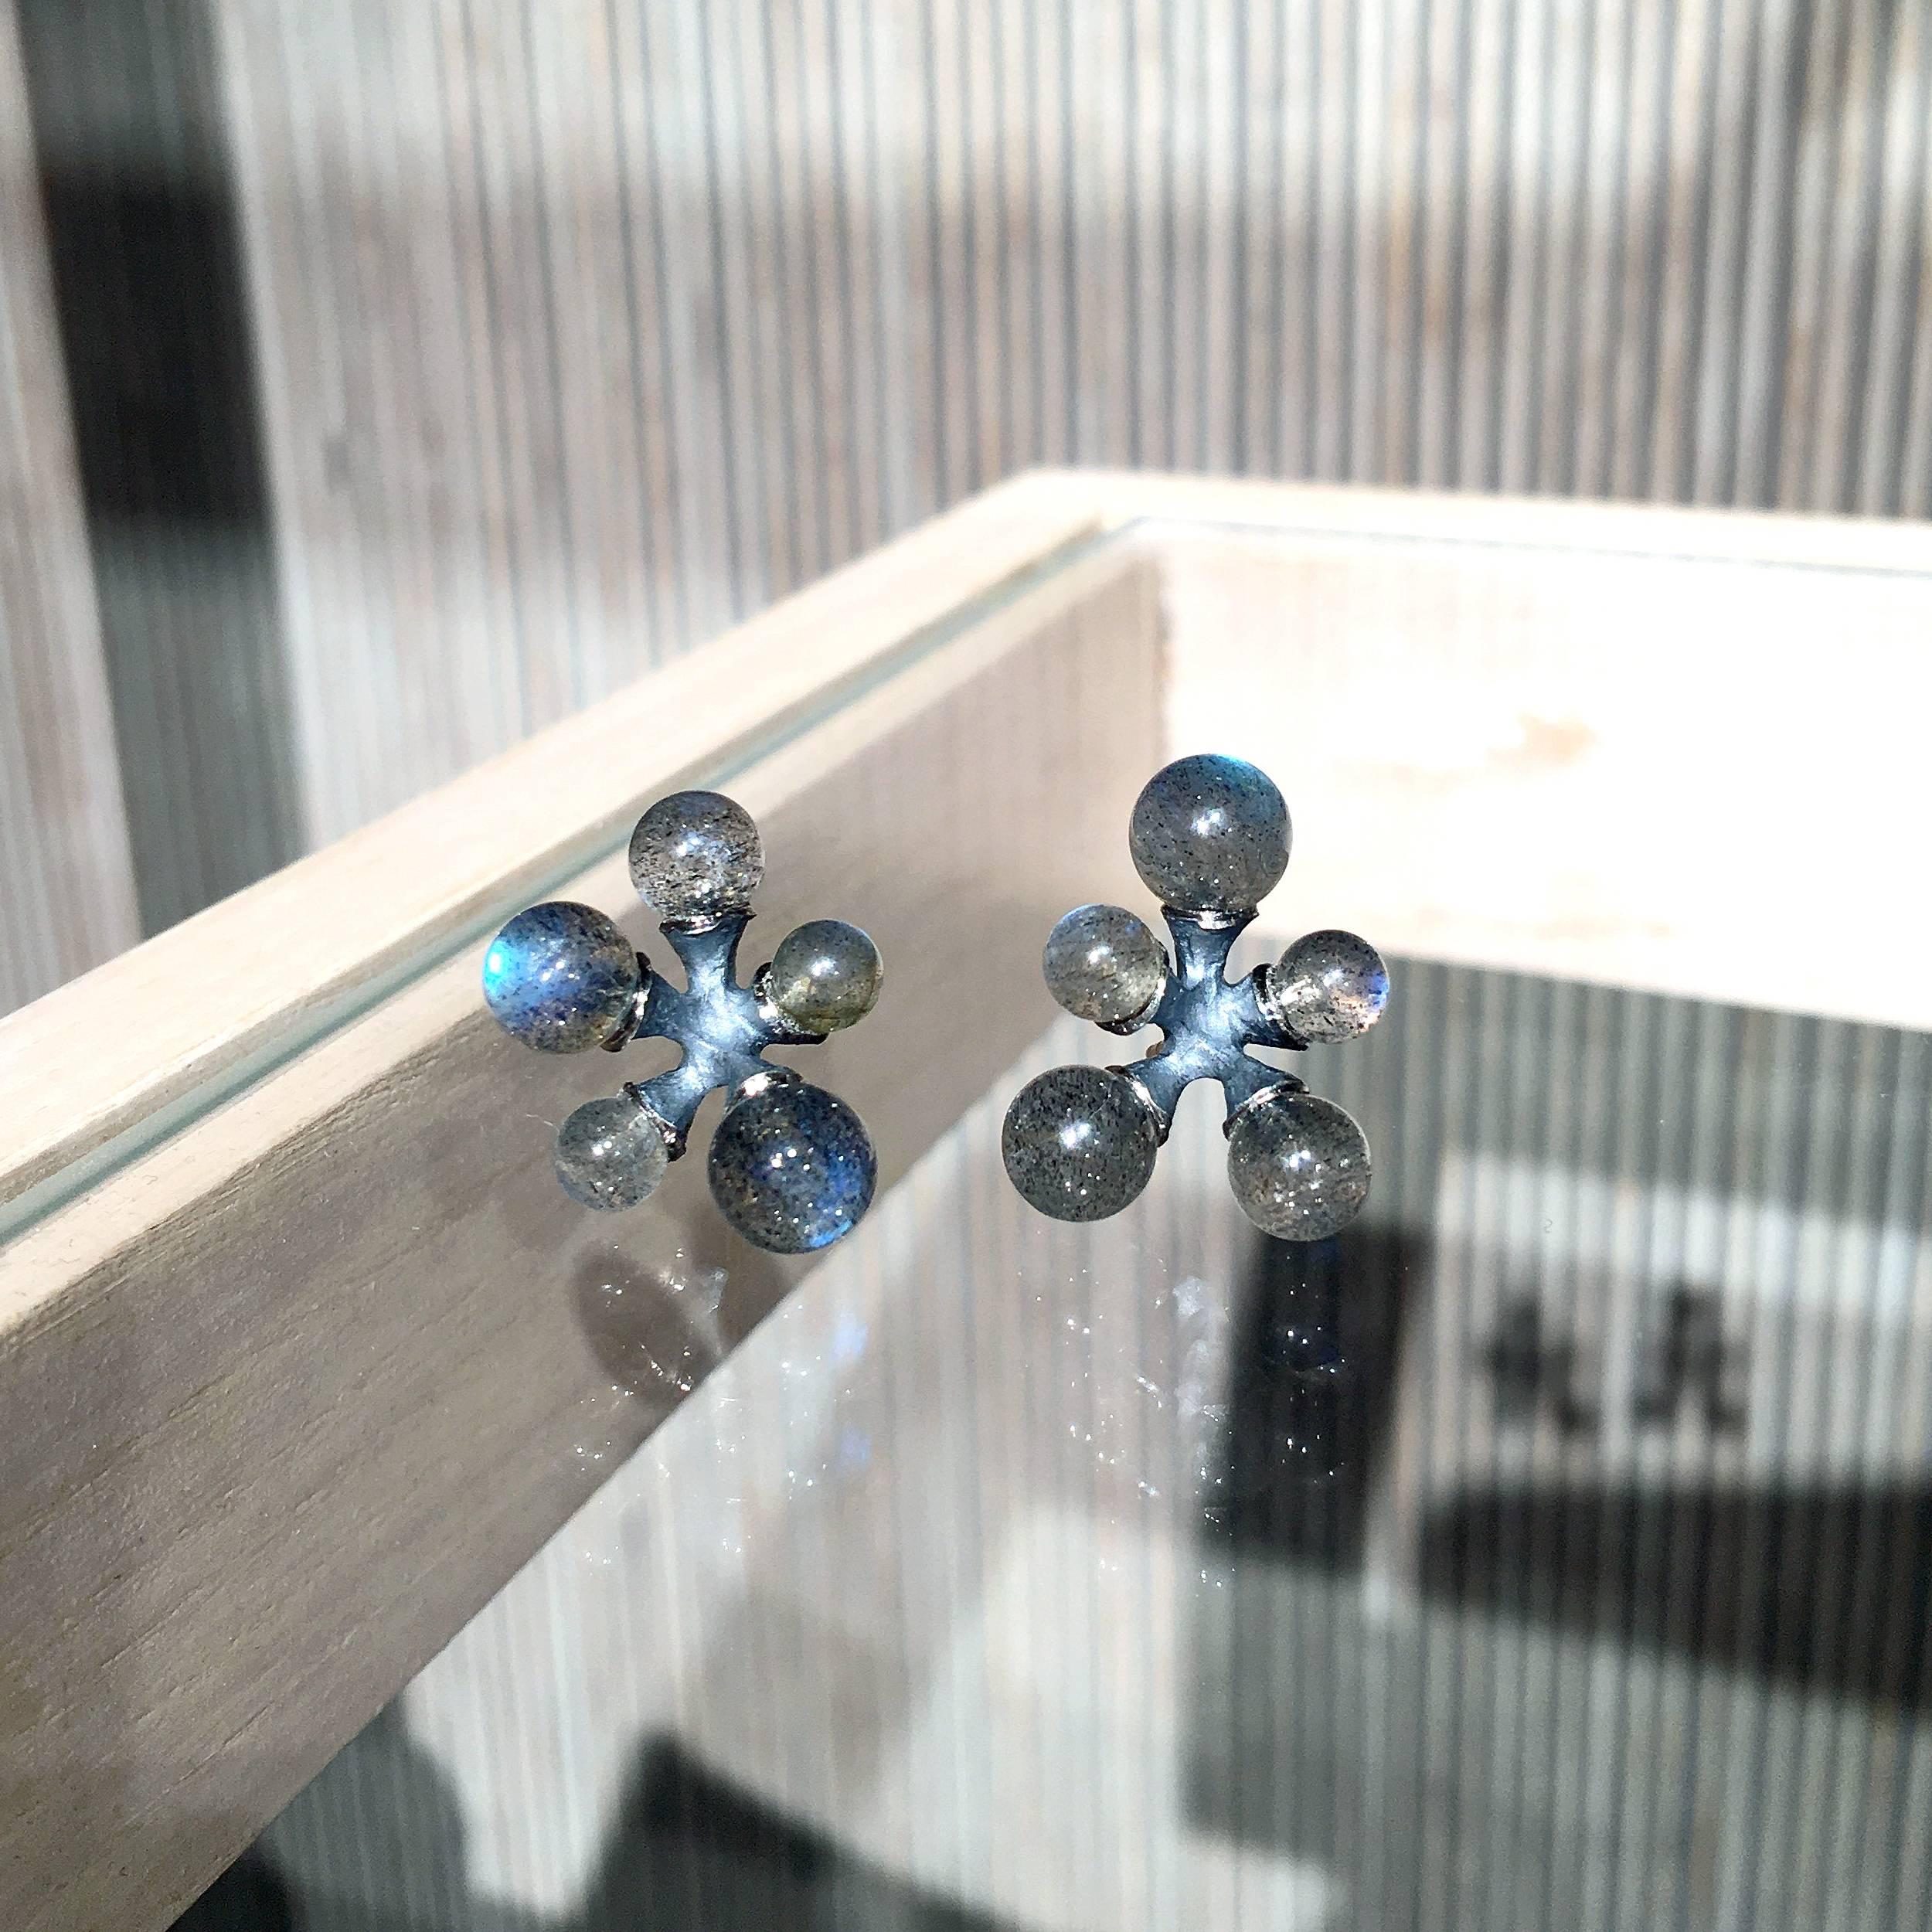 Micro Jacks Earrings handcrafted by renowned jewelry designer John Iversen in oxidized sterling silver with ten assorted size labradorite beads exhibiting strong labradorescence, flashing beautiful combinations of blue, violet, and green. on 18k